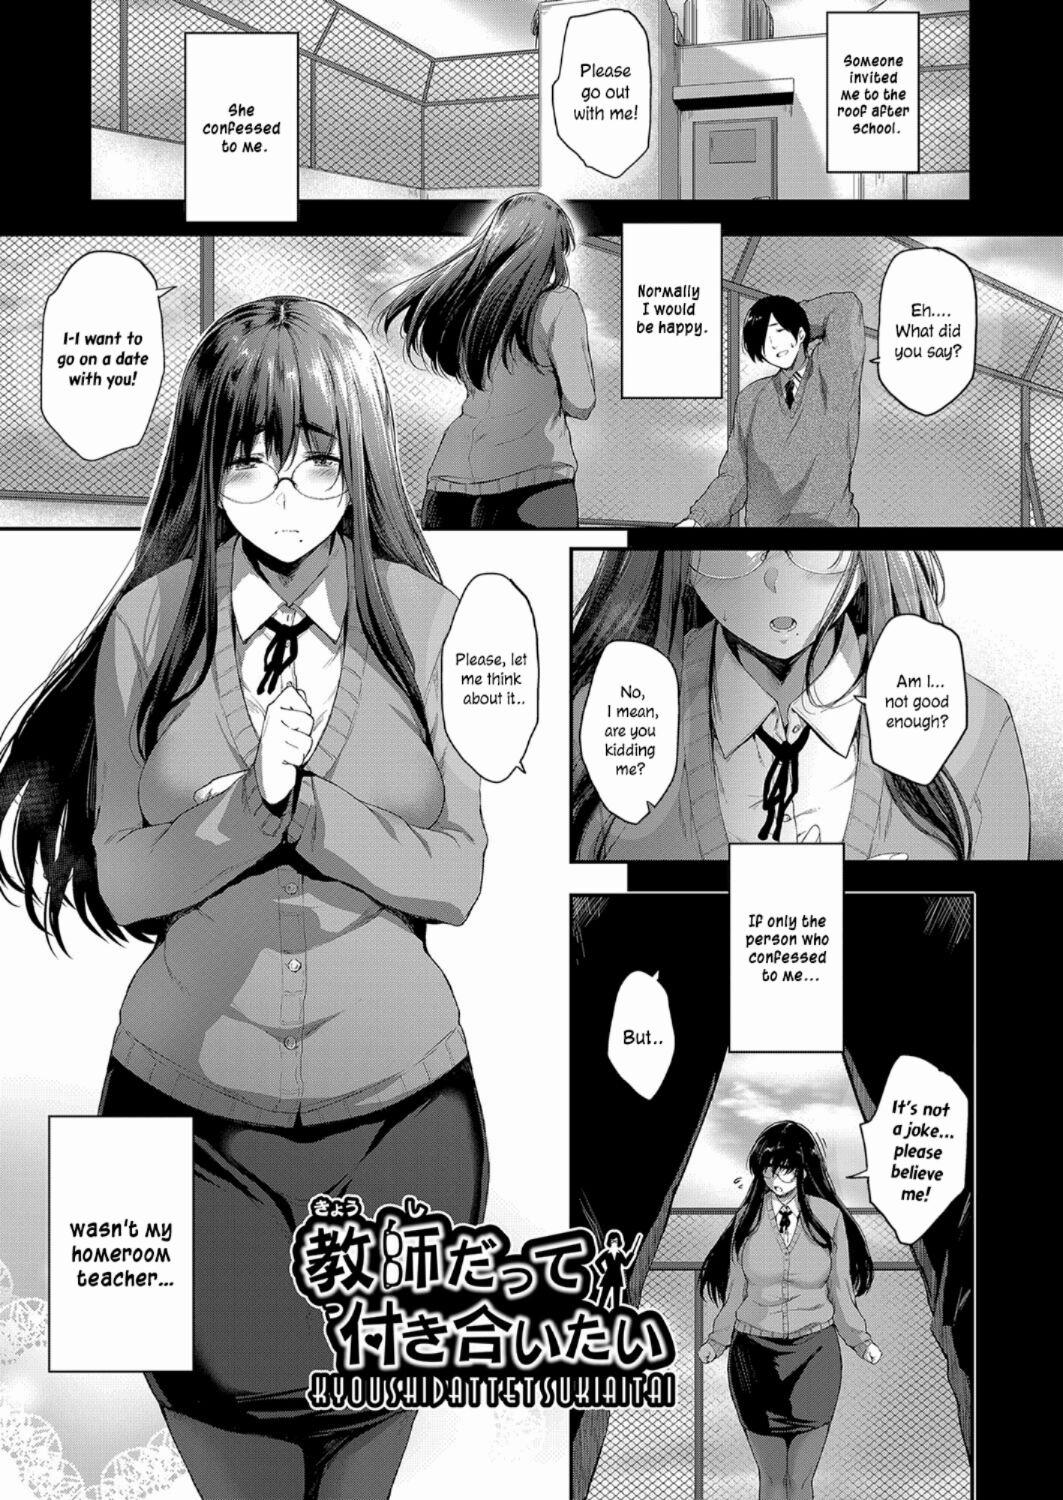 Best Blowjob Kyoushi datte Tsukiaitai | Even a Teacher Wants to Date Leite - Page 1